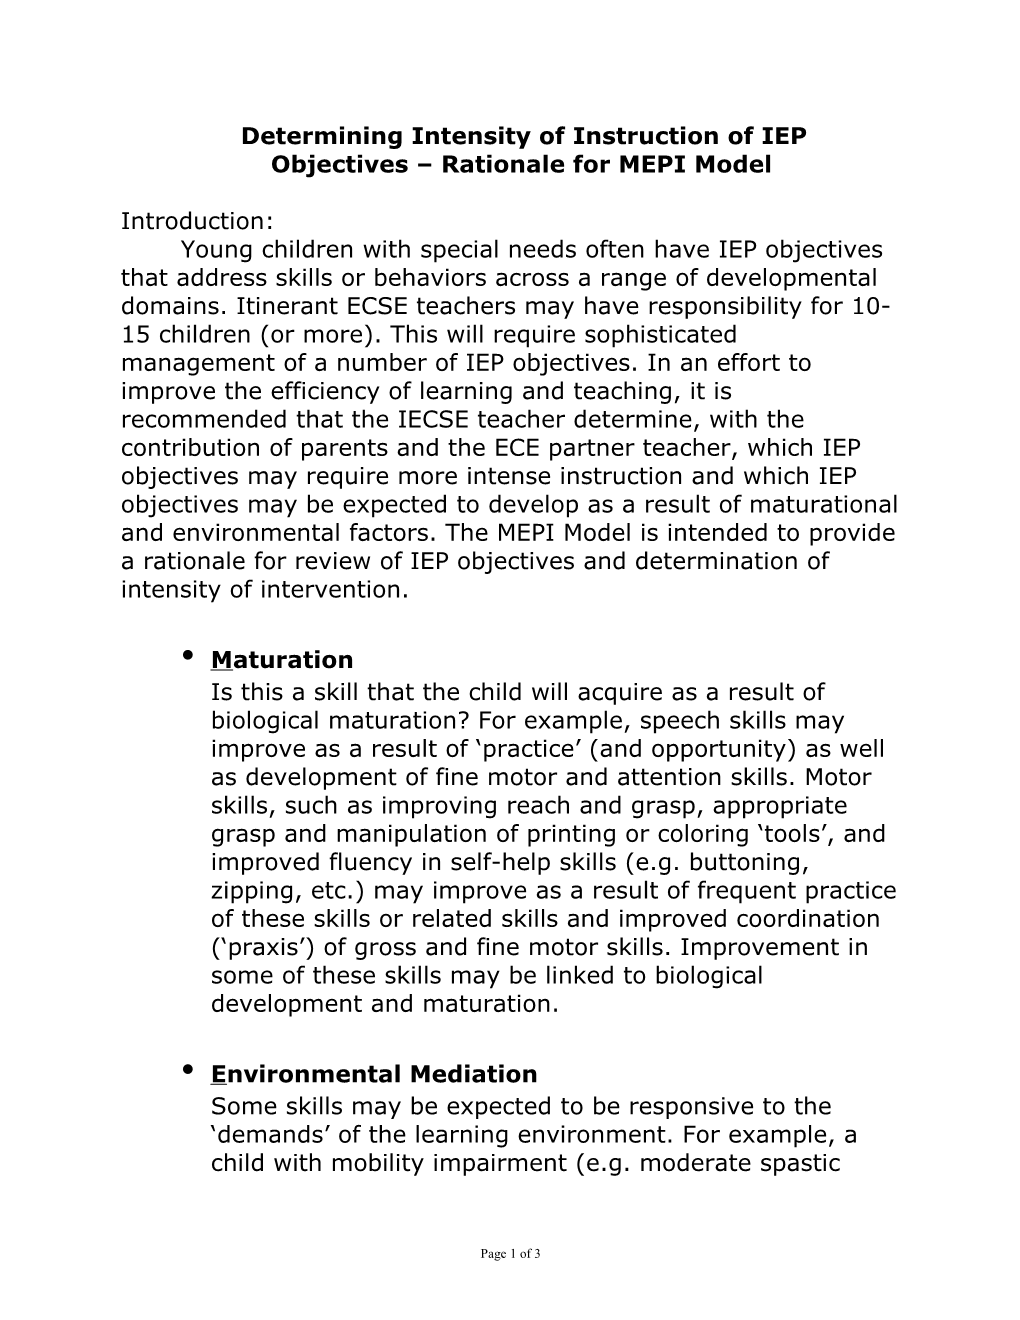 Determining Intensity of Instruction of IEP Objectives Rationale for MEPI Model